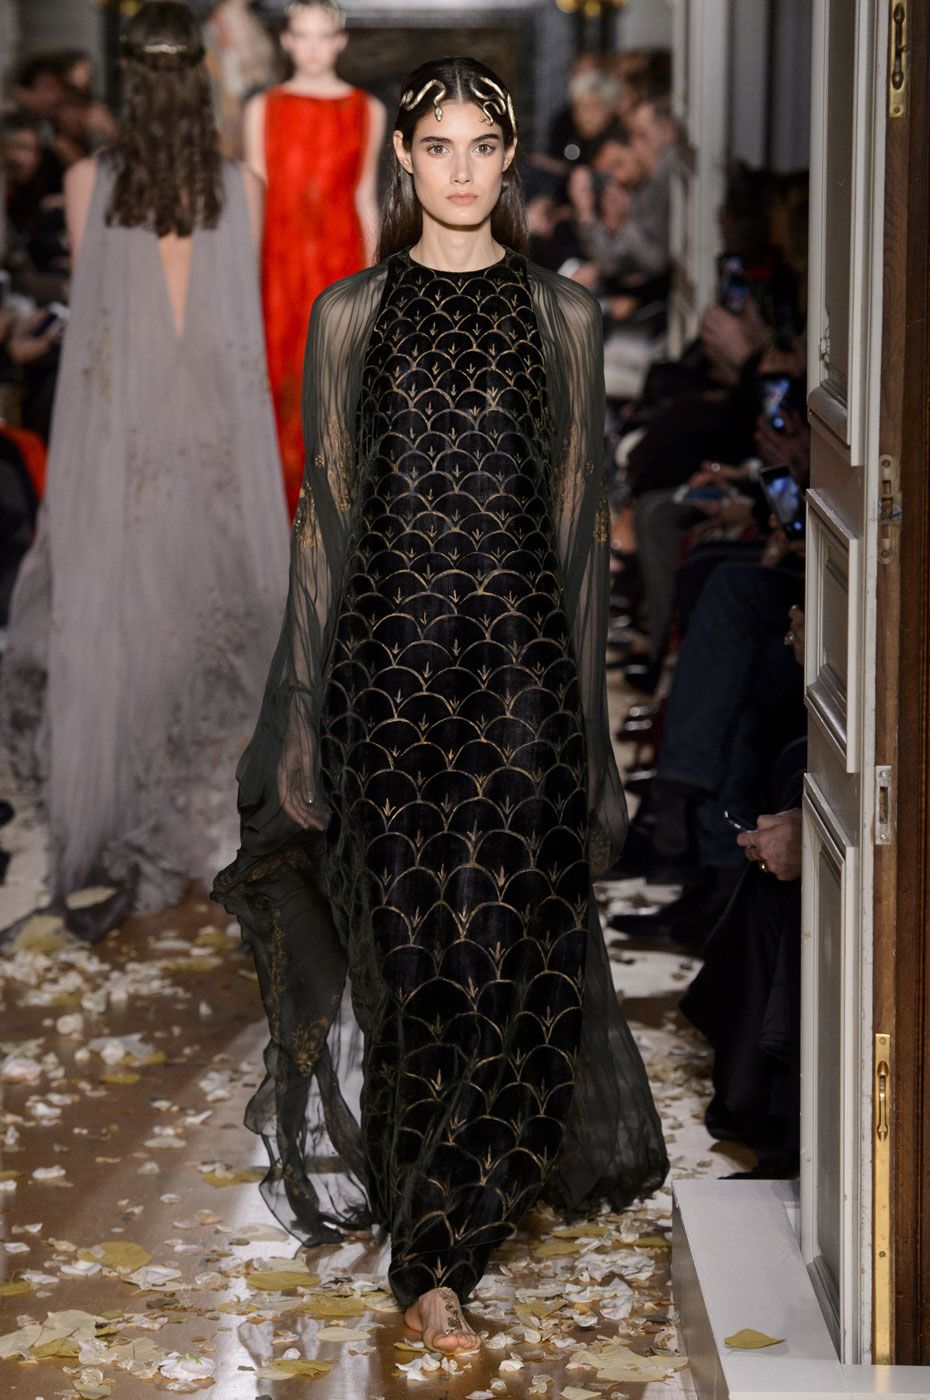 Valentino Couture show spring/summer 2016 pictures and review